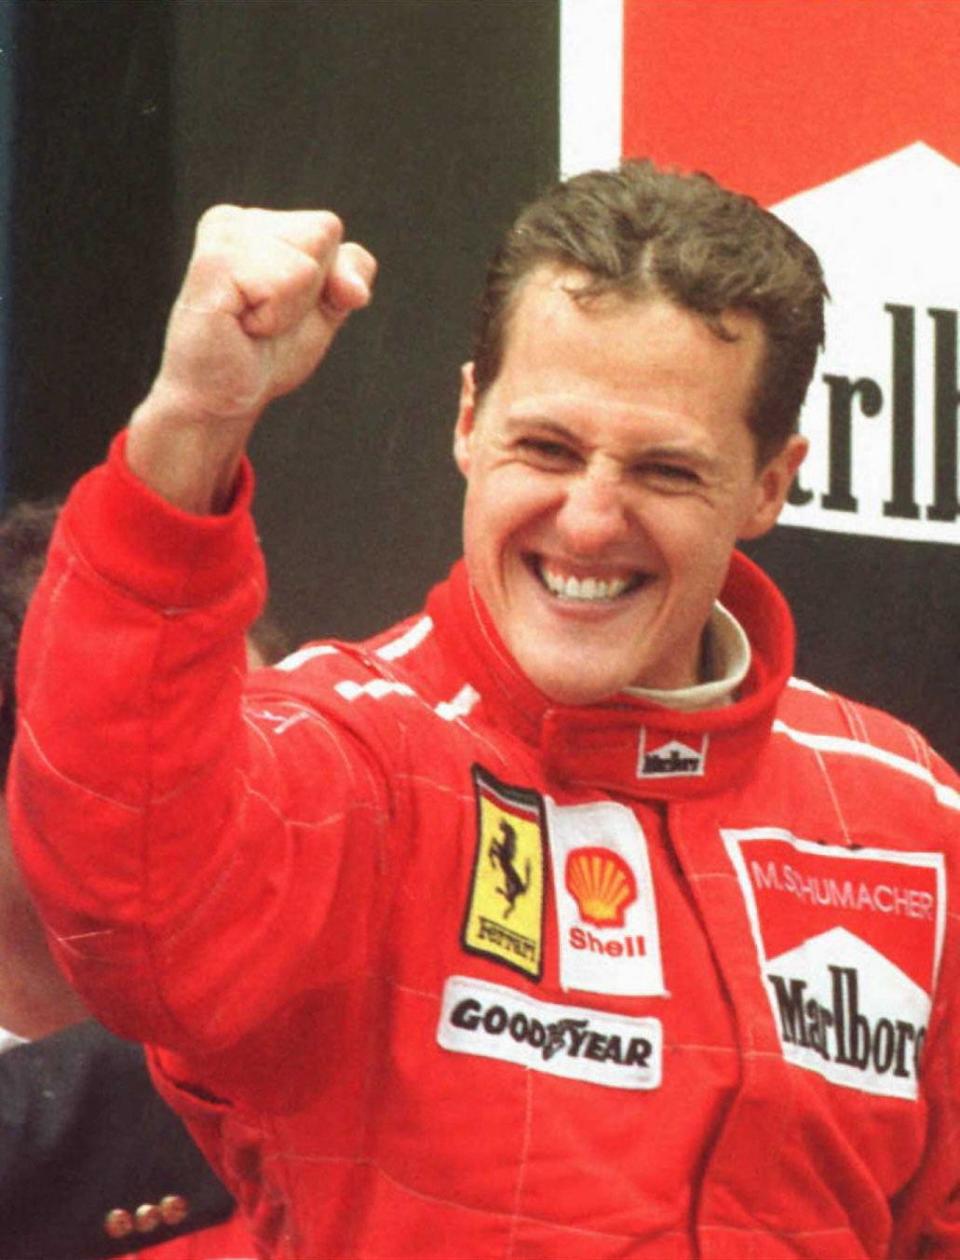 Germany's Michael Schumacher clenches his fist after winning the Spanish Formula One Grand Prix 02 June 1996 on the Cataluna racetrack in Barcelona. AFP PHOTO (Photo by Eric CABANIS / AFP) (Photo by ERIC CABANIS/AFP via Getty Images)